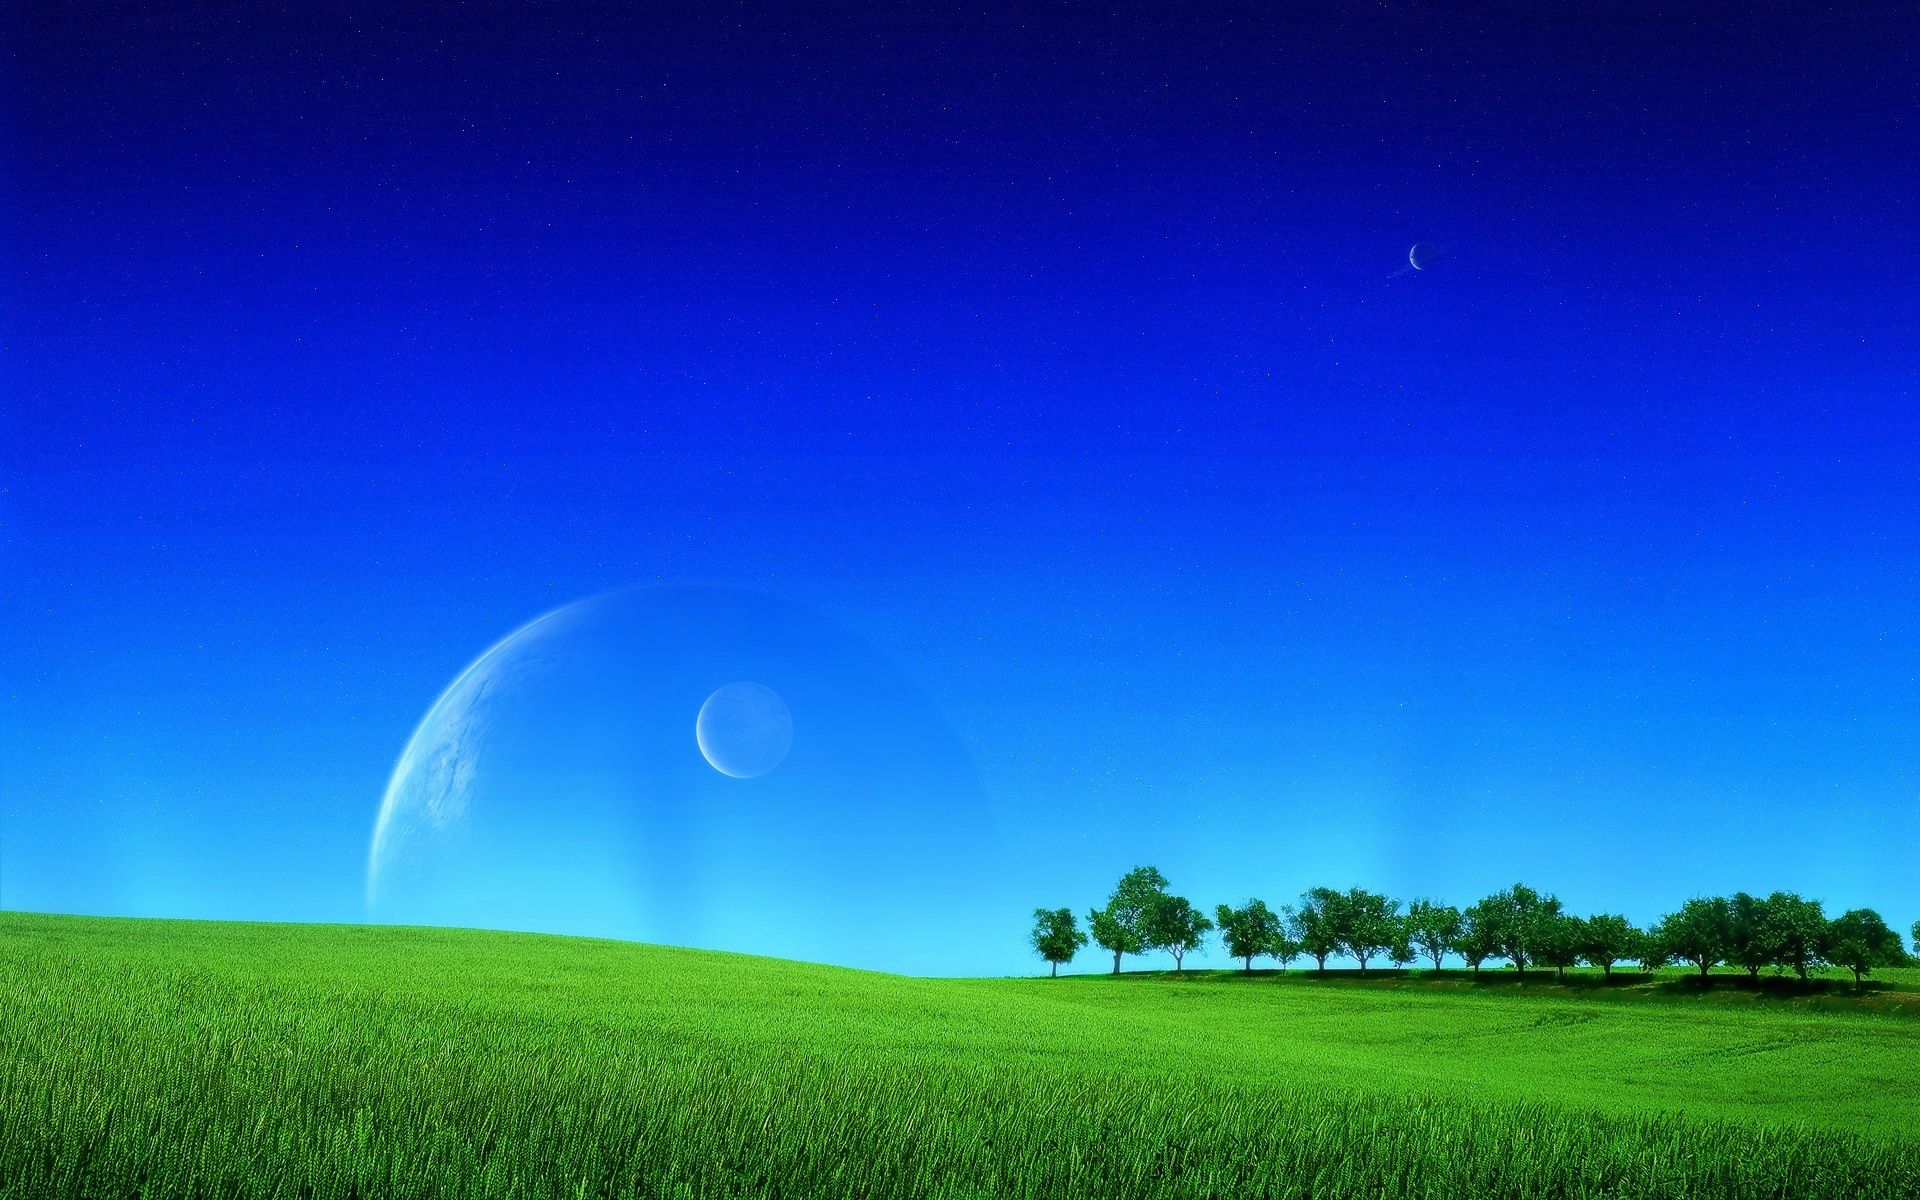 planets, lawn, fantasy, universe, grass, sky, greens, field wallpaper for mobile